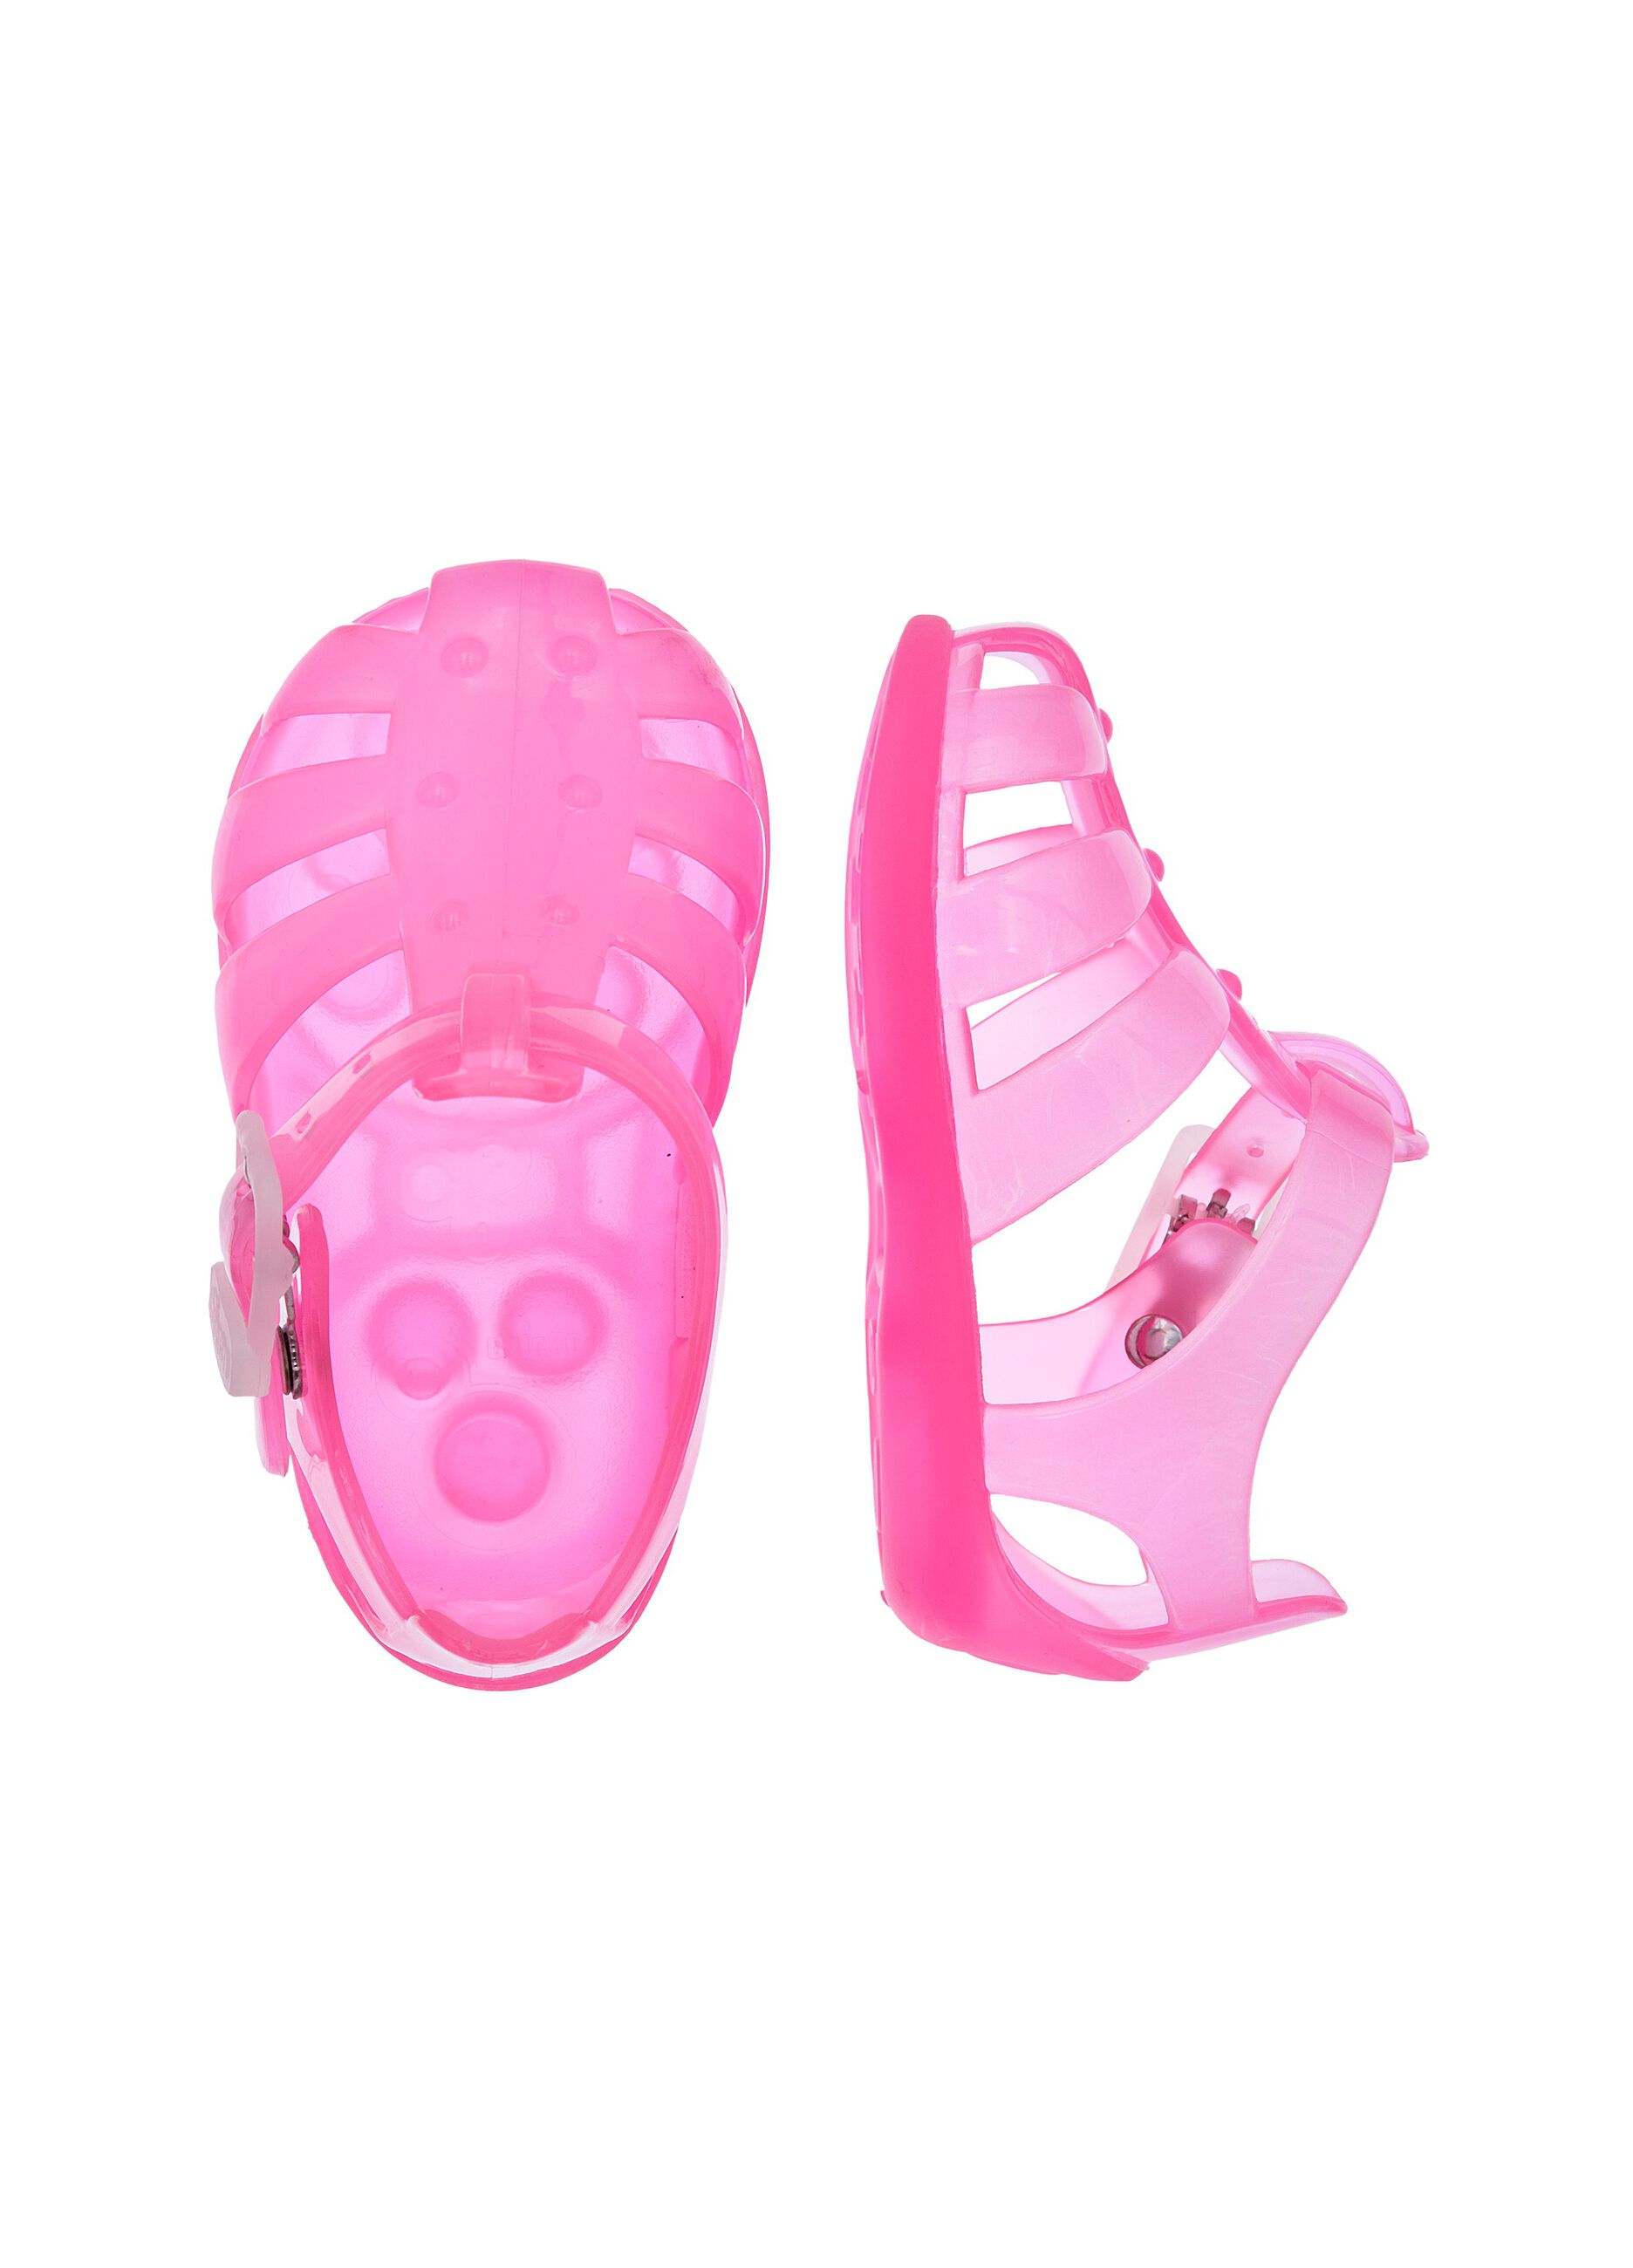 Moon sandals in rubber